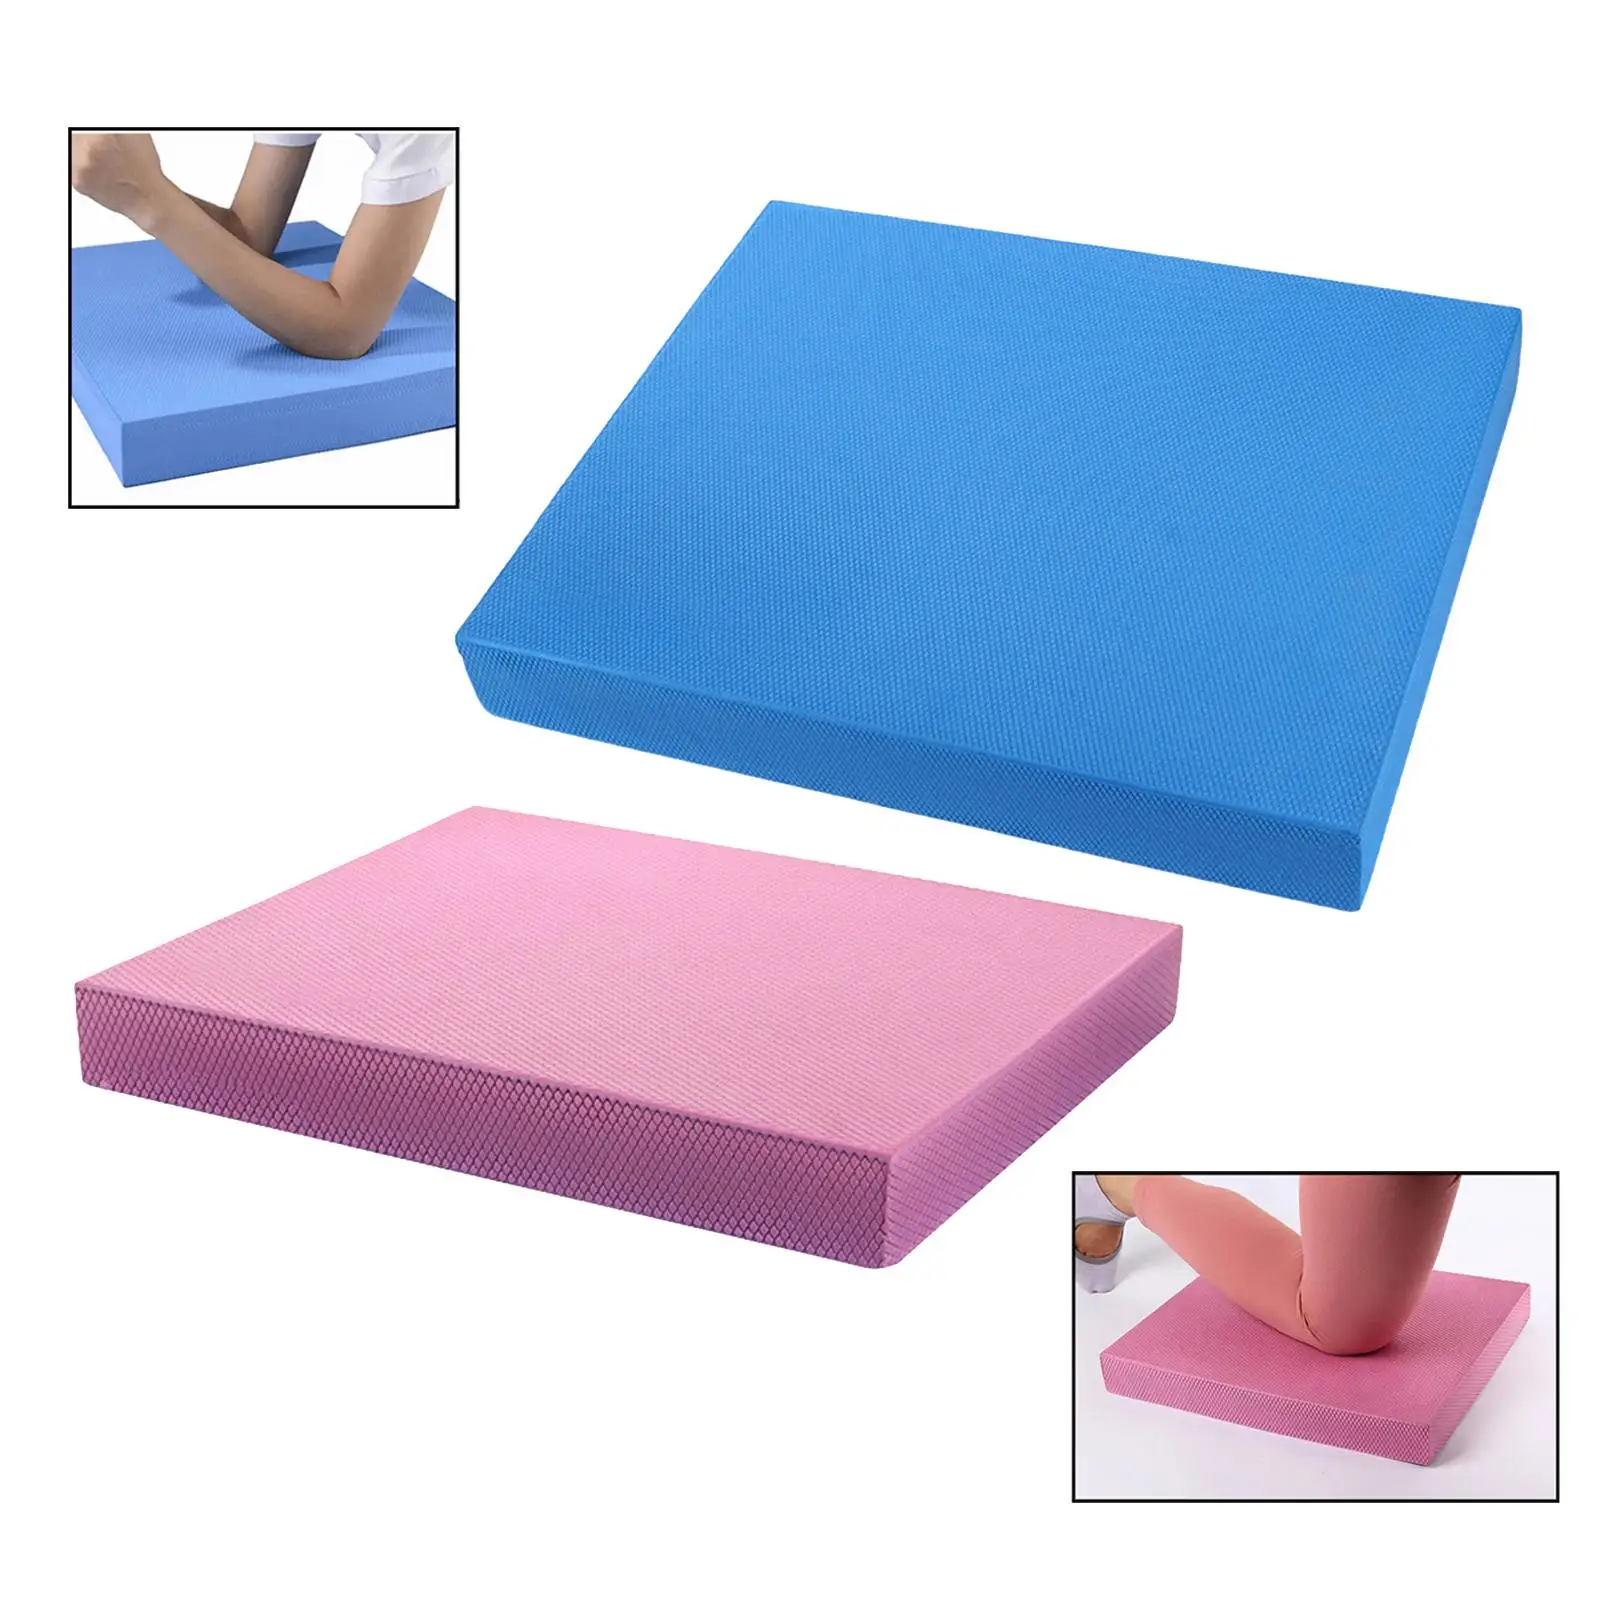 Soft Balance Pad Cushion Yoga Mat Knee Ankle Pad Exercise Indoor Workout